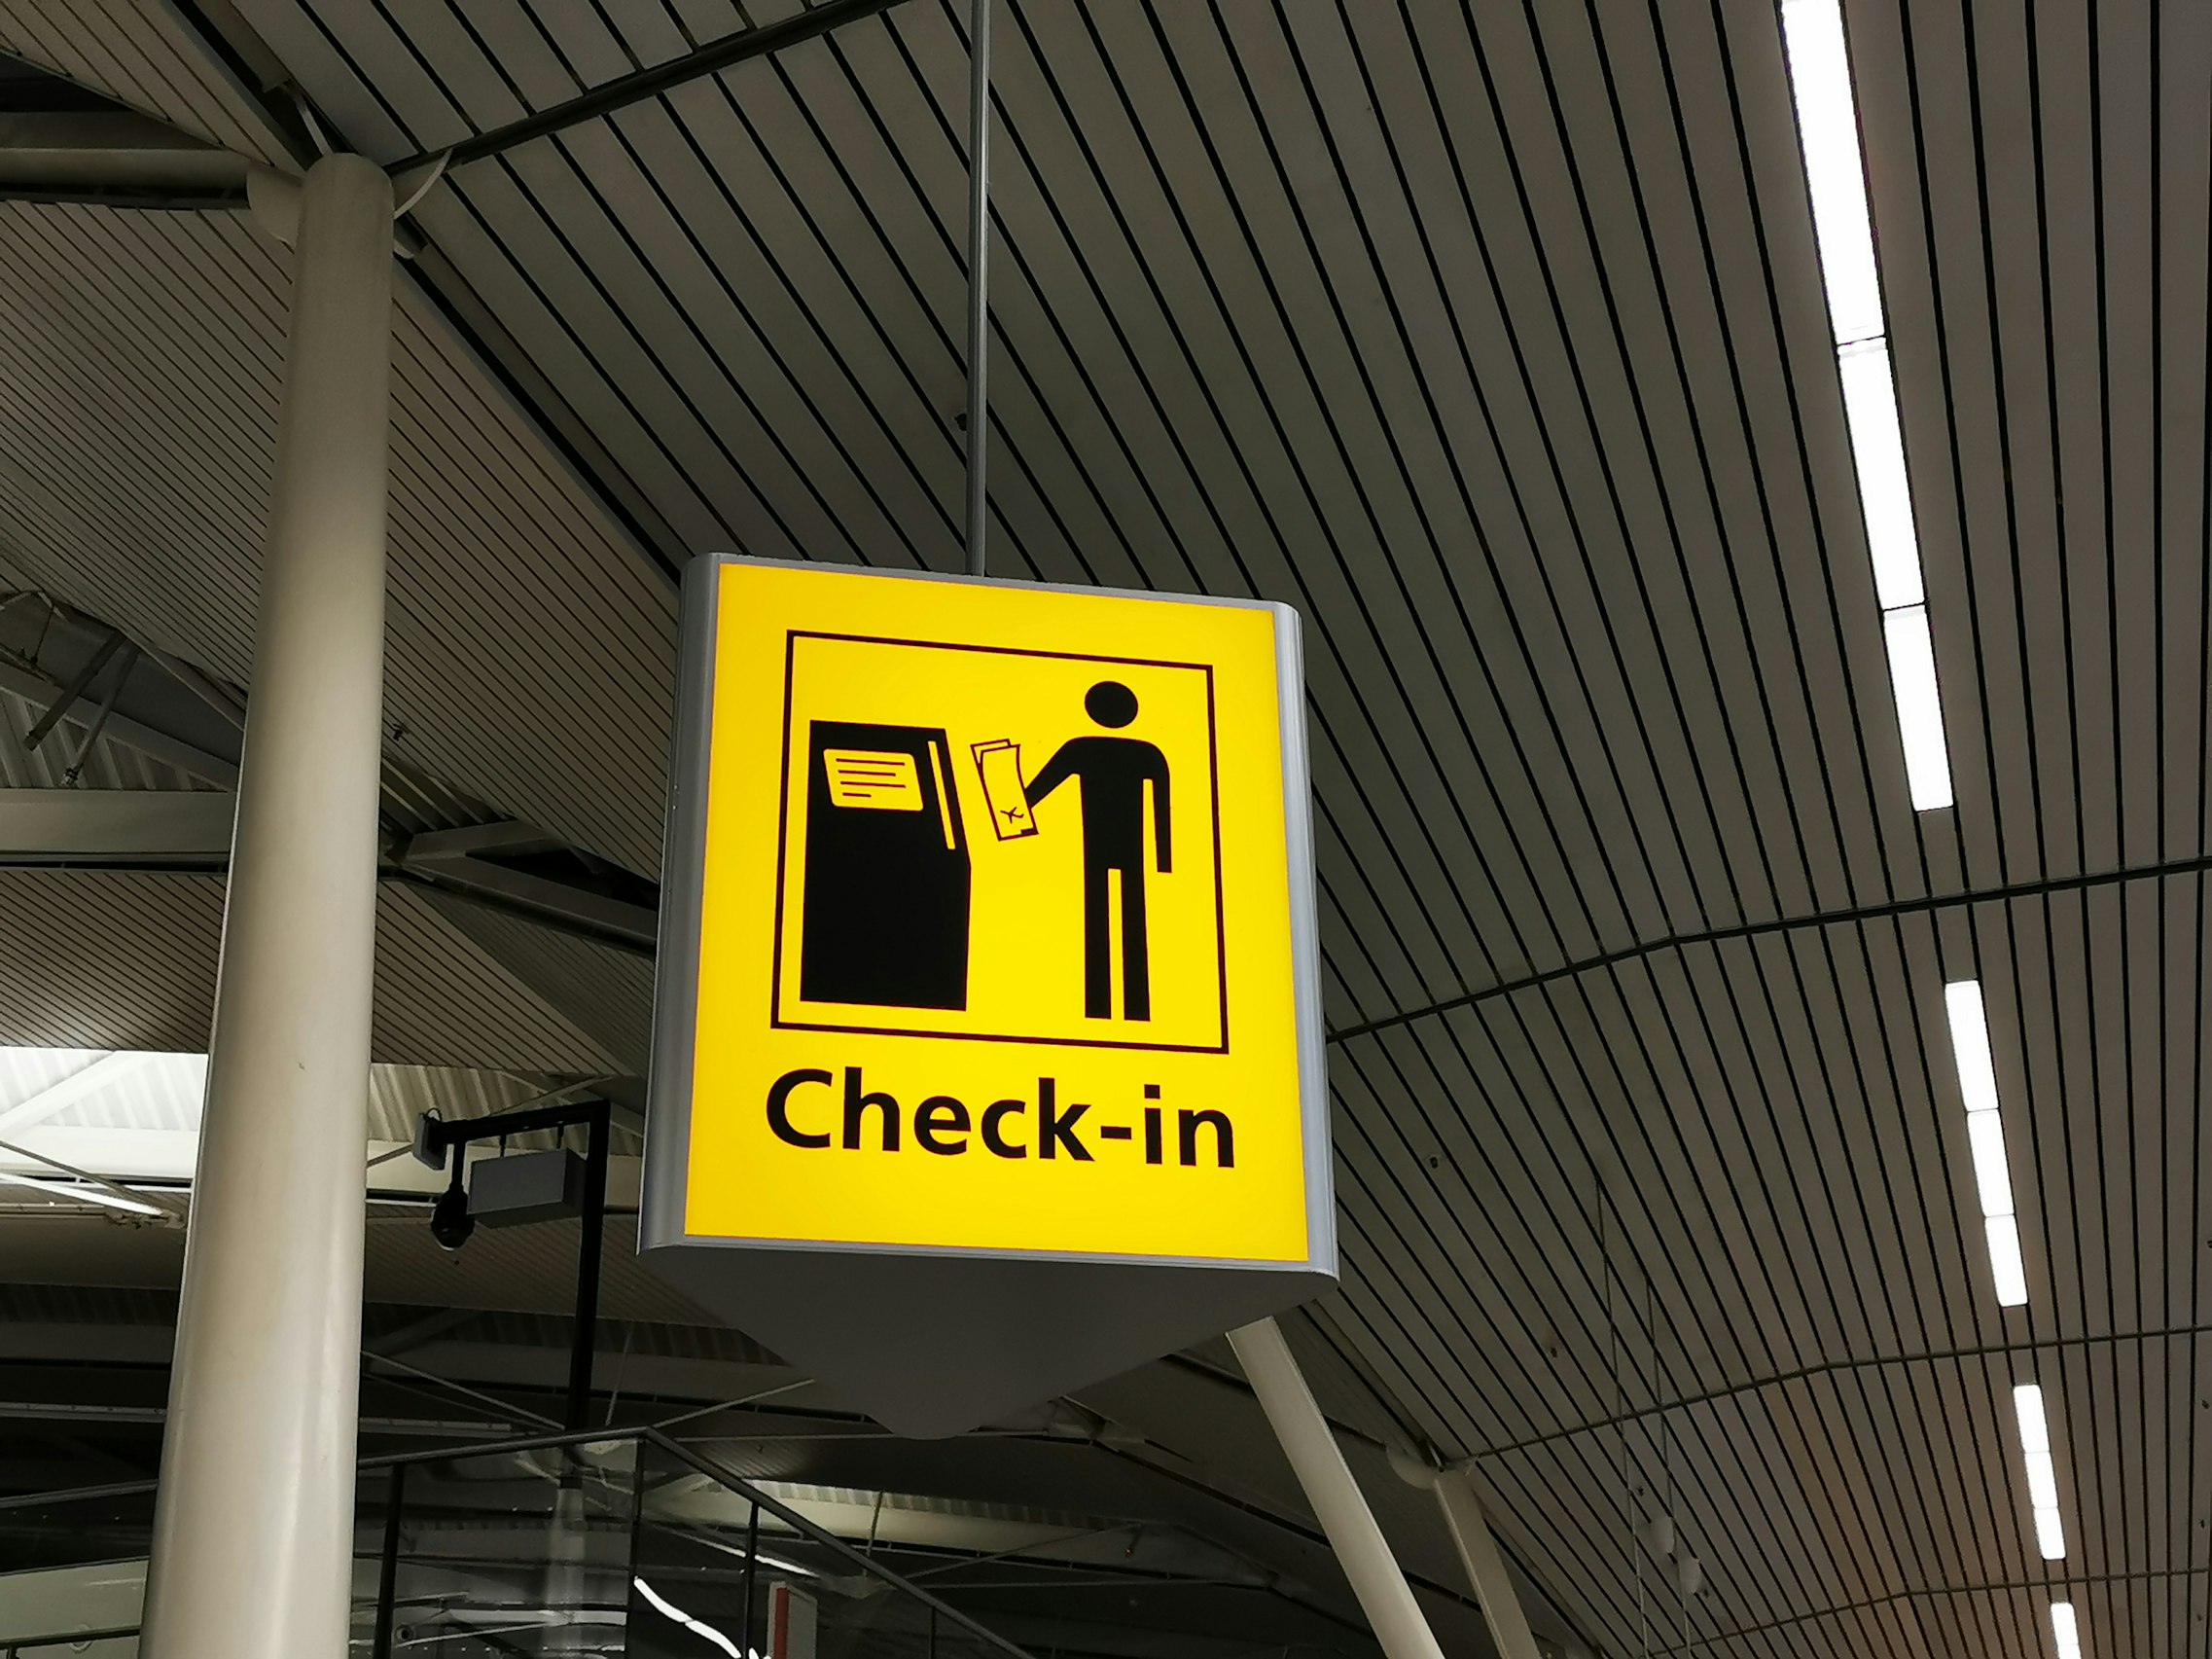 Unsplash image from Larissa Gies showing a yellow check-in sign